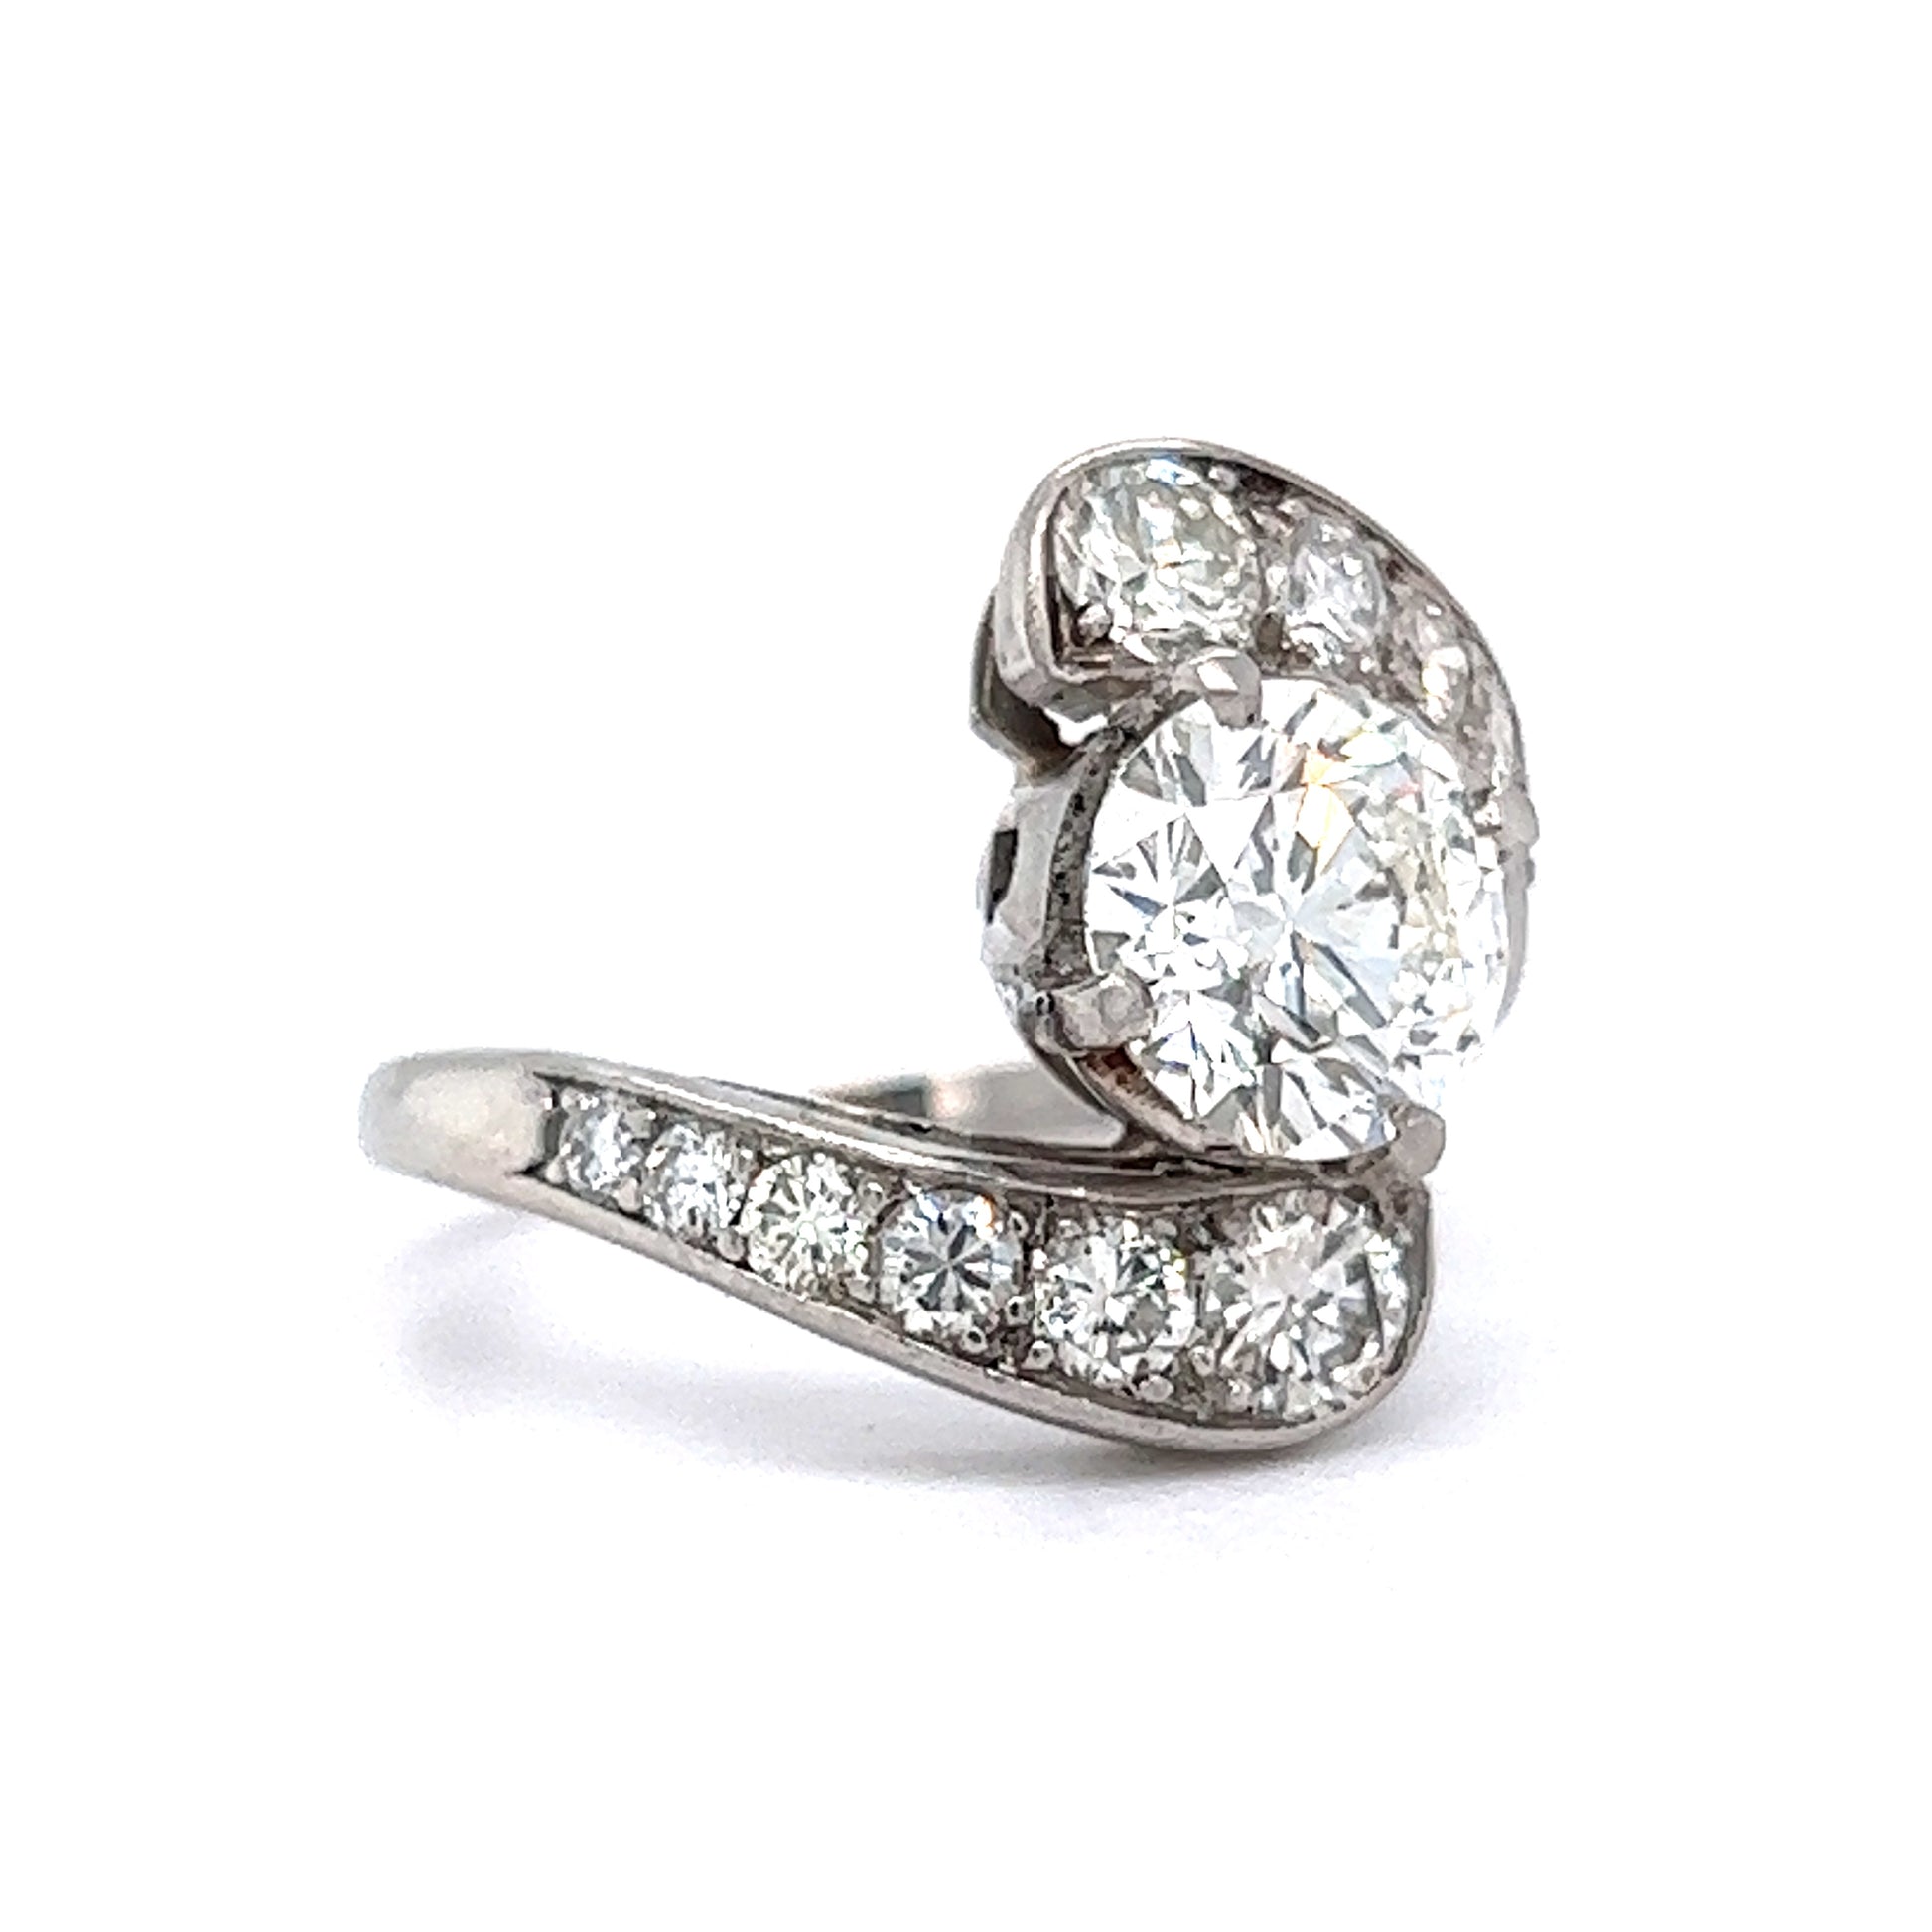 Mid-Century Bypass Diamond Engagement Ring in PlatinumComposition: Platinum Ring Size: 7 Total Diamond Weight: 3.01ct Total Gram Weight: 8.2 g Inscription: 10%
      